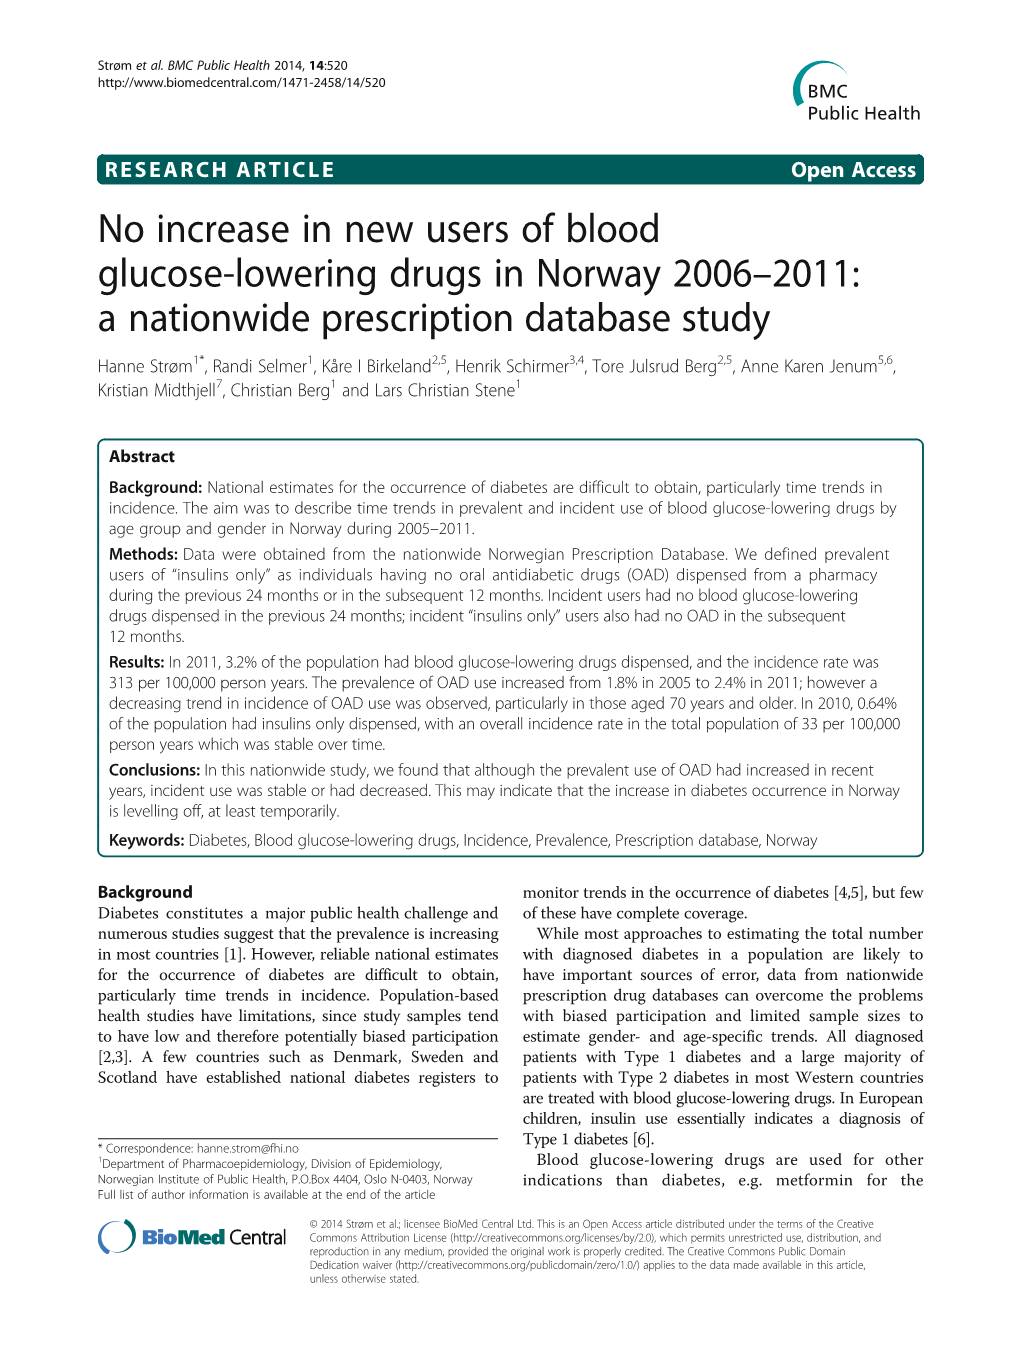 No Increase in New Users of Blood Glucose-Lowering Drugs in Norway